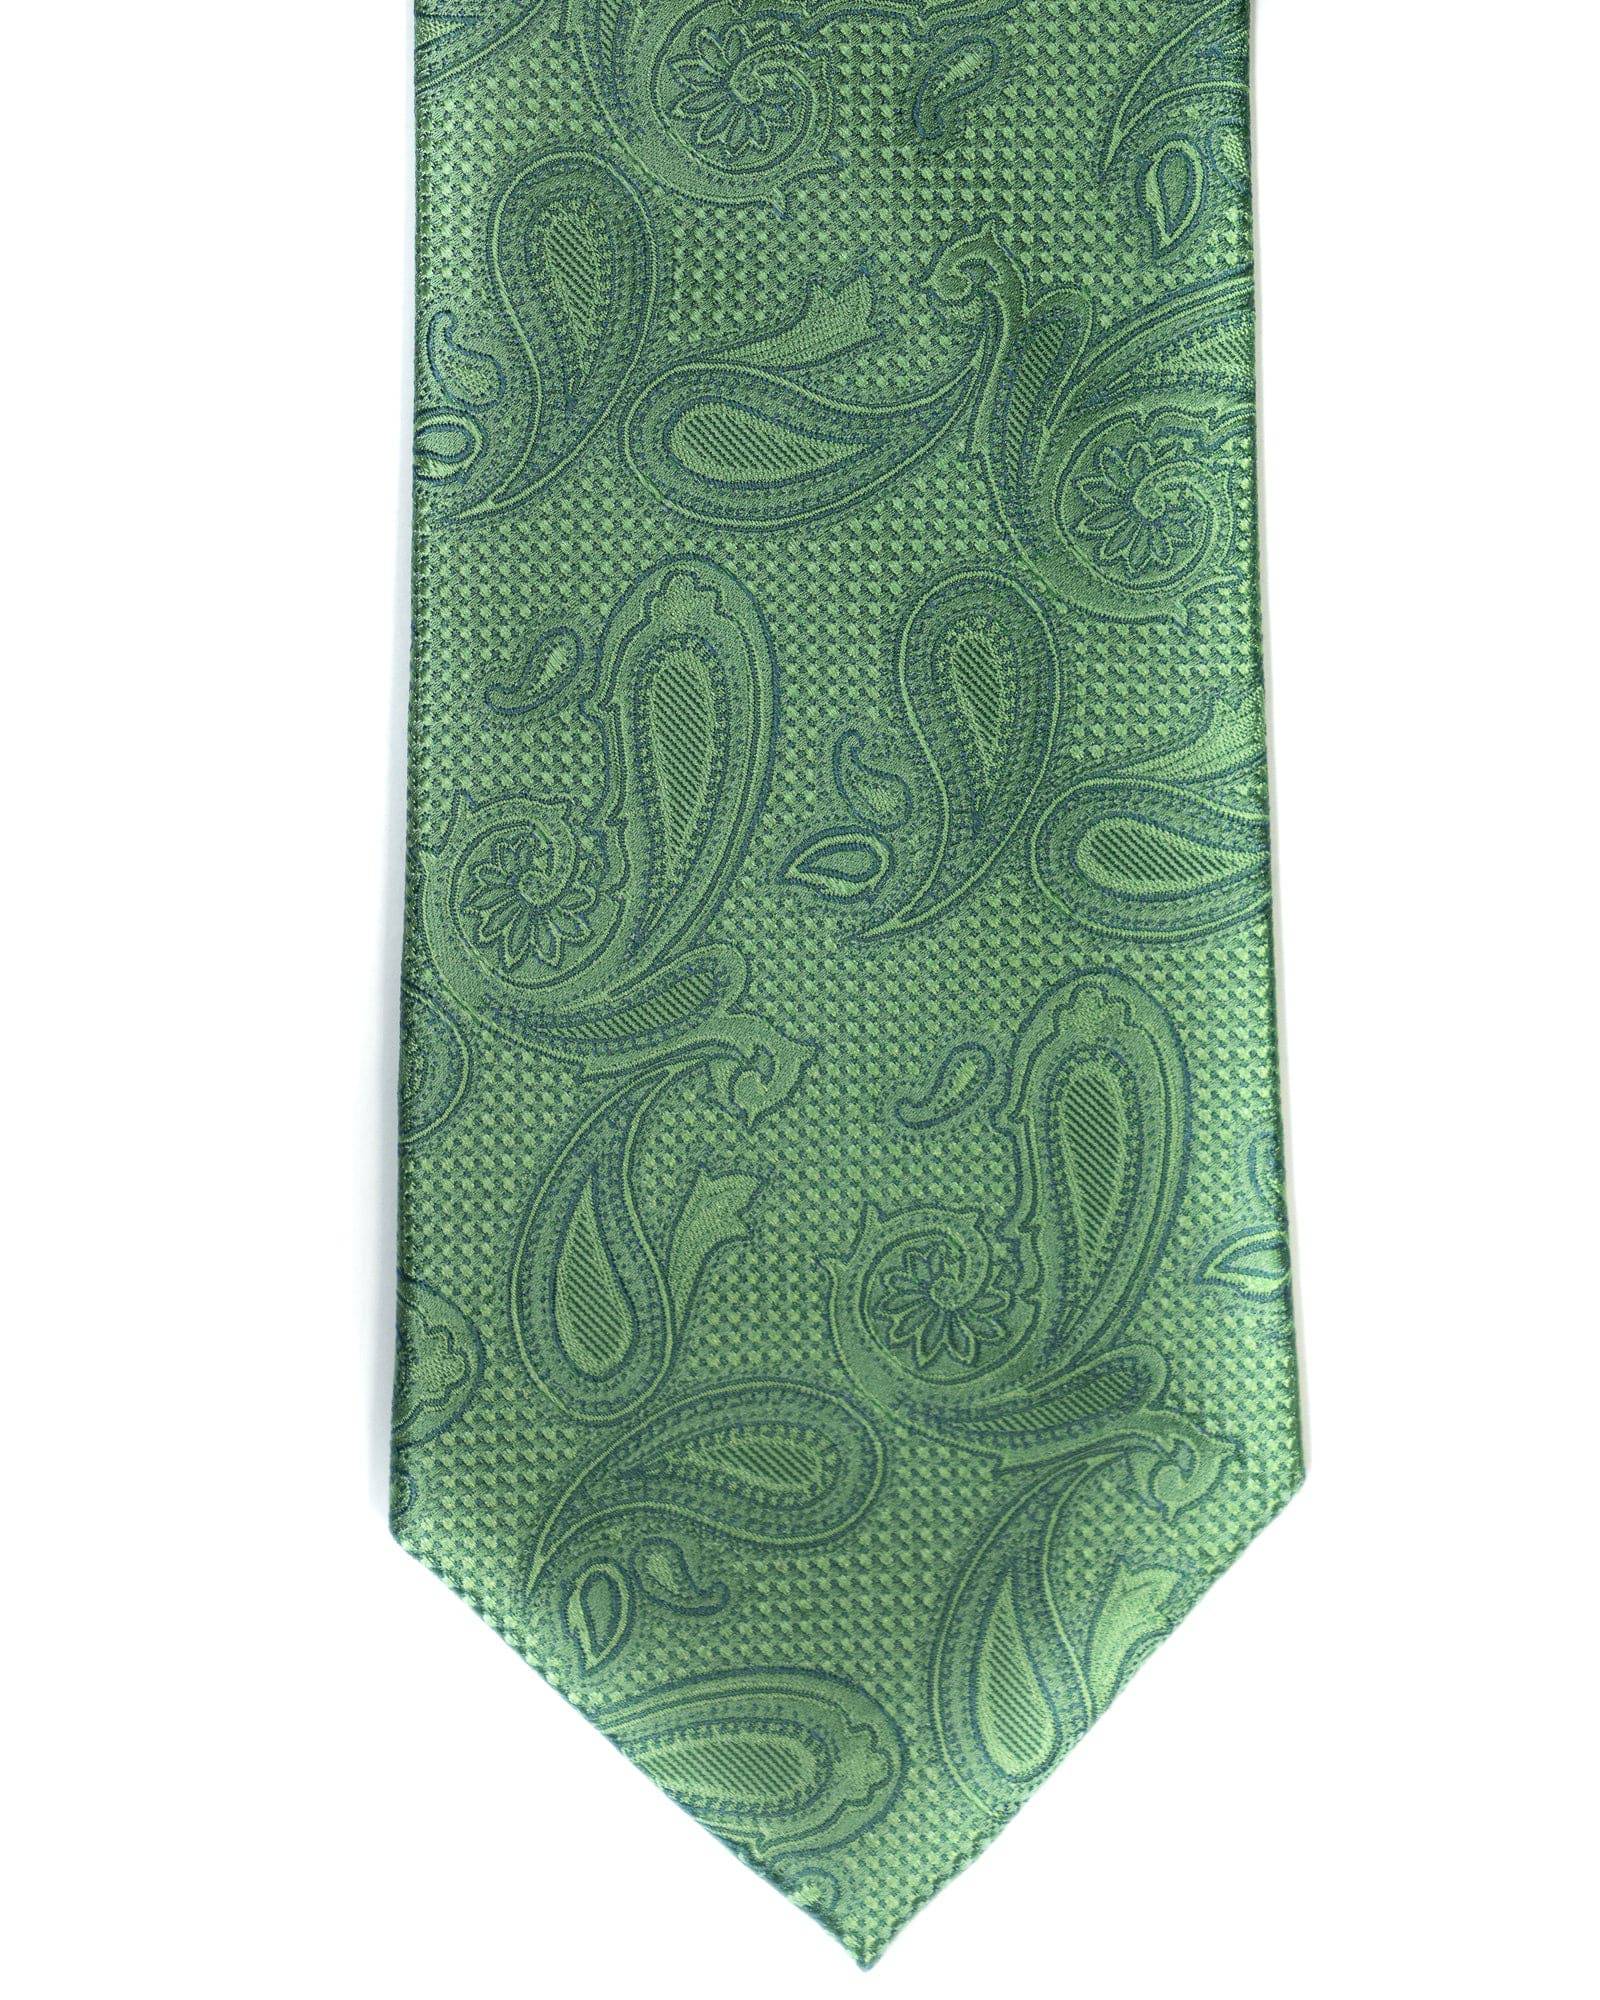 Paisley Silk Tie in Lime With Navy - Rainwater's Men's Clothing and Tuxedo Rental